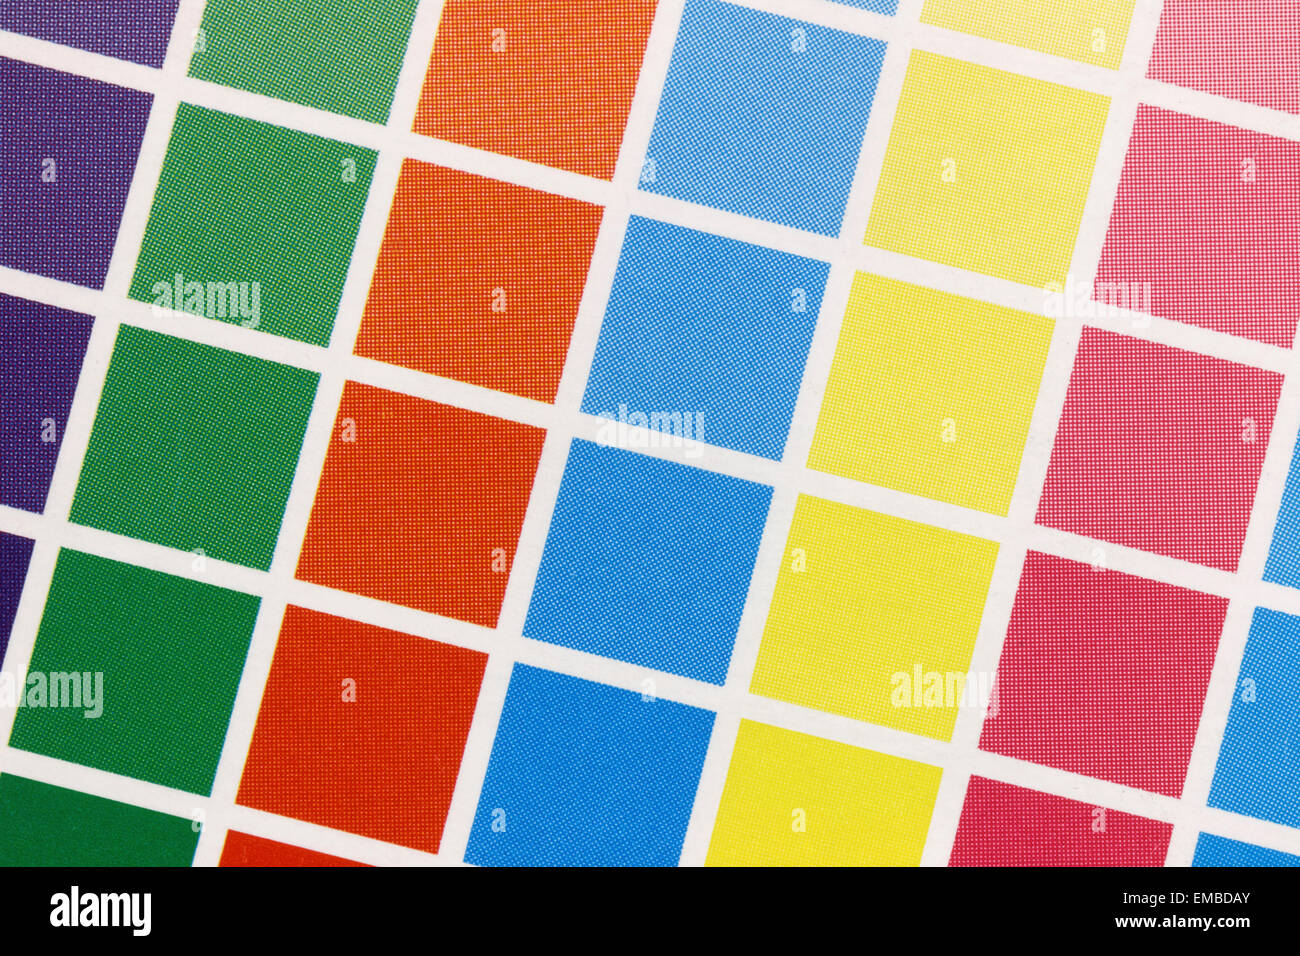 Close-up of a a cmyk test print with many color squares from above Stock Photo